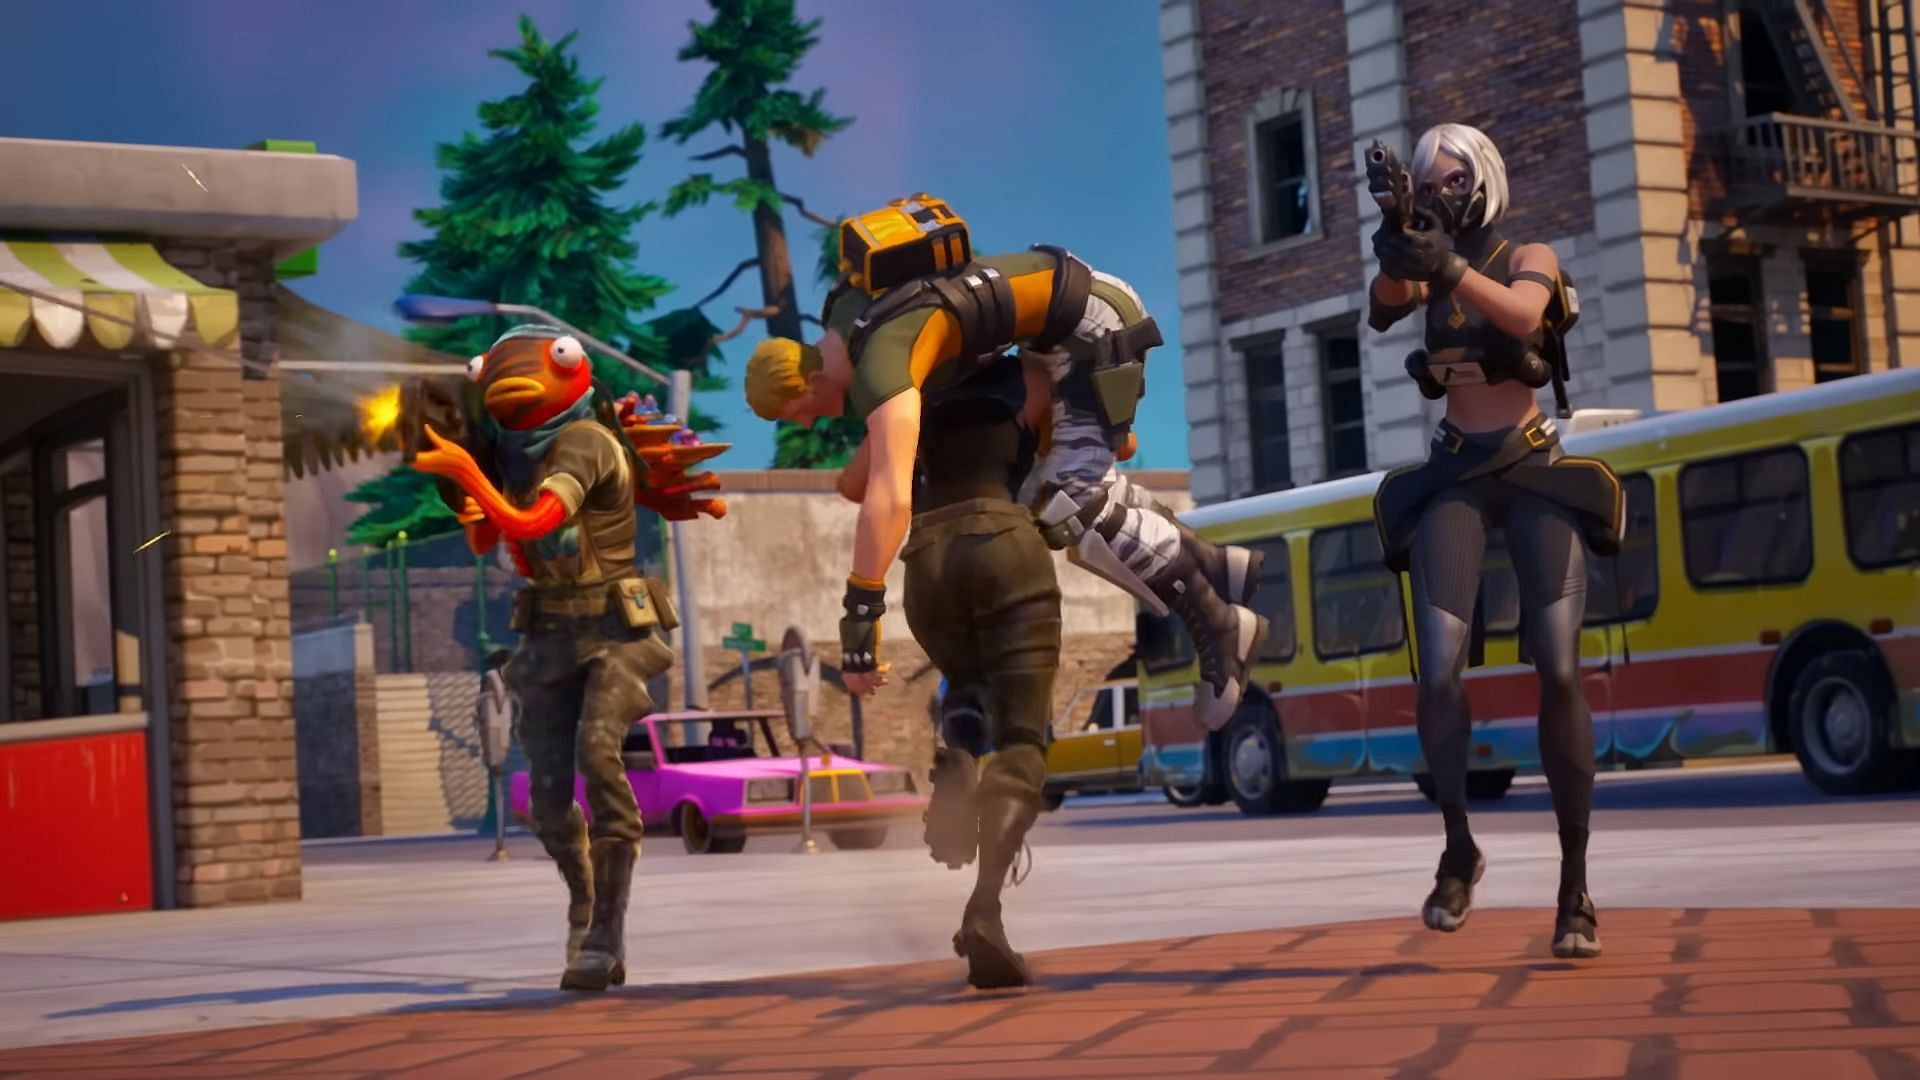  Duos and Trios could be coming to Fortnite Reload (Image via Epic Games)